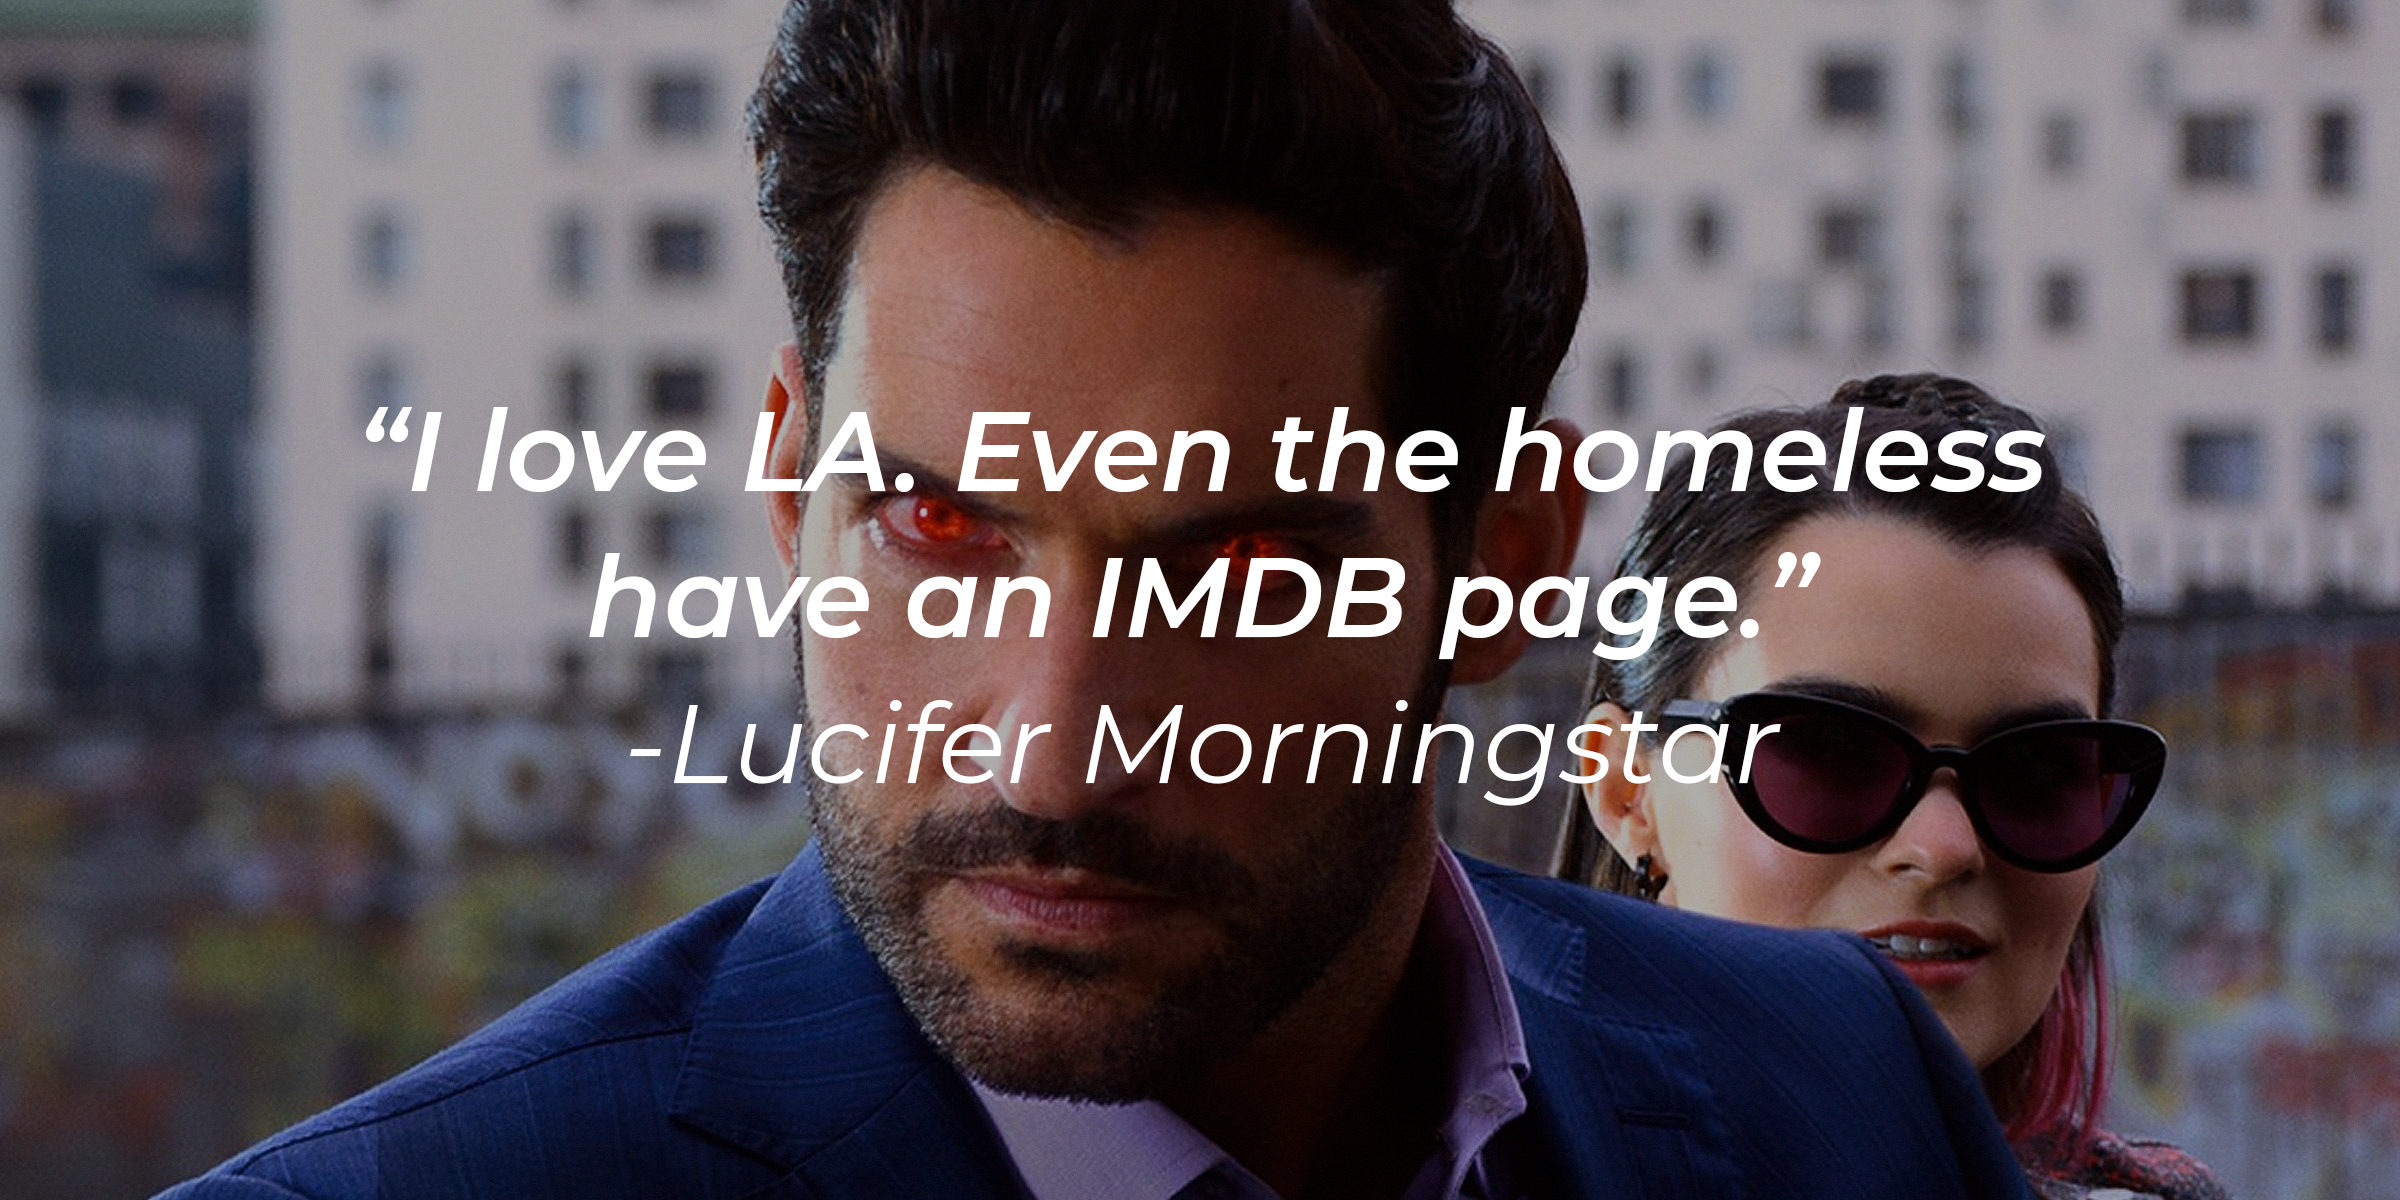 Lucifer Morningstar’s quote: "I love LA. Even the homeless have an IMDB page." | Source: Facebook.com/LuciferNetflix